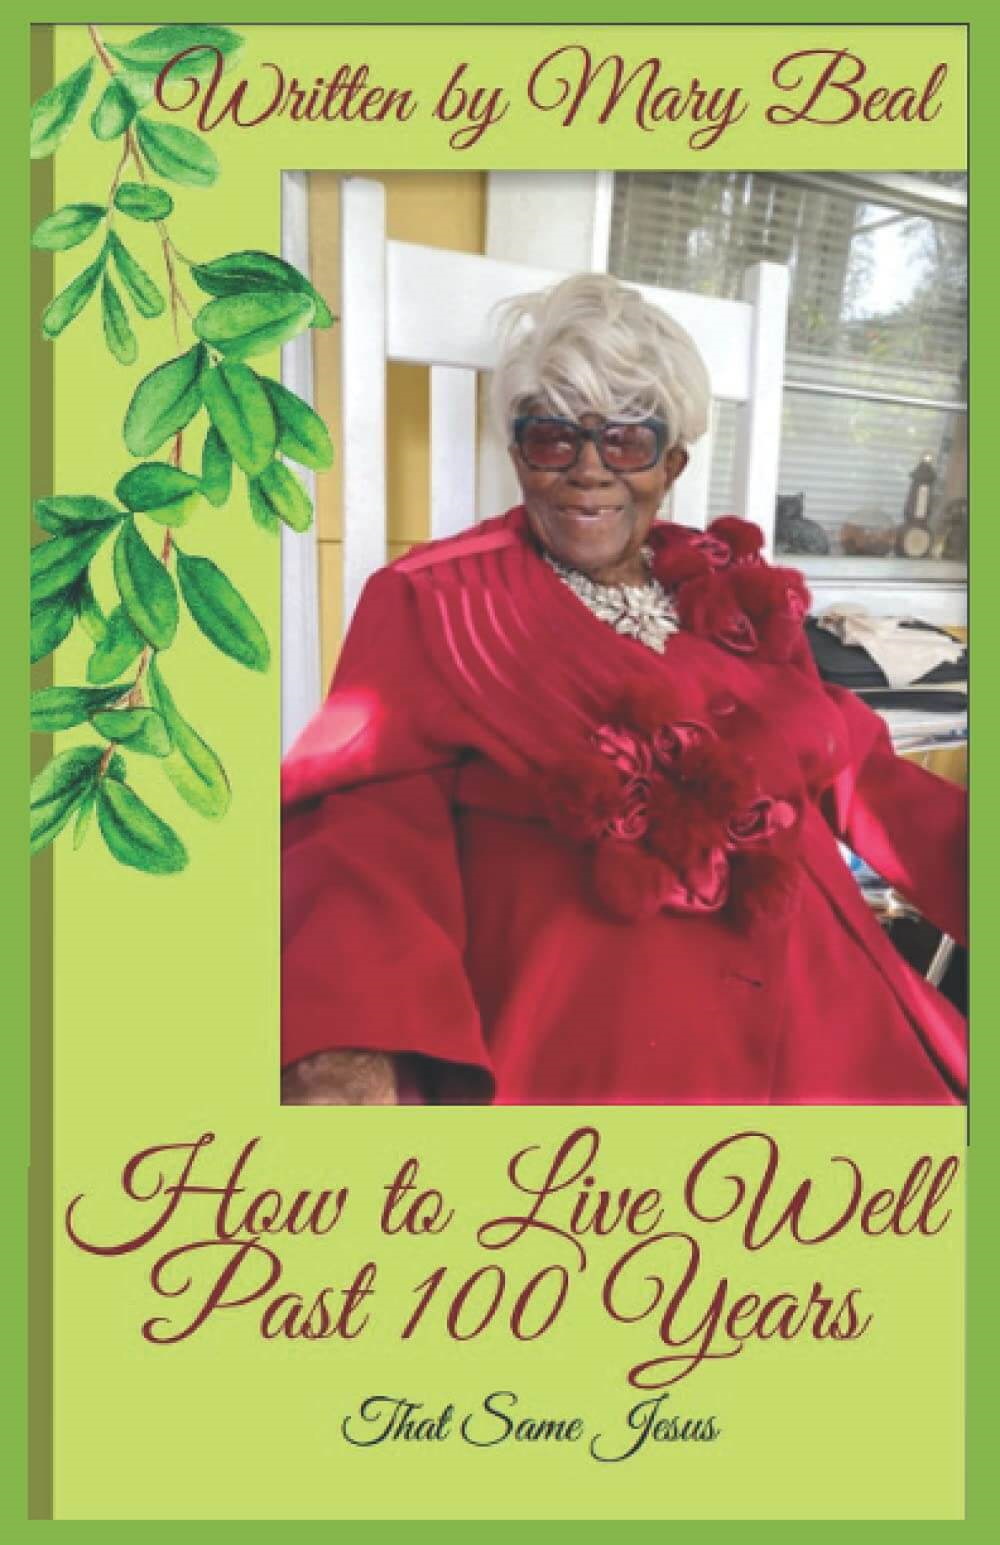 how to live well past 100 years by by Mary Beal